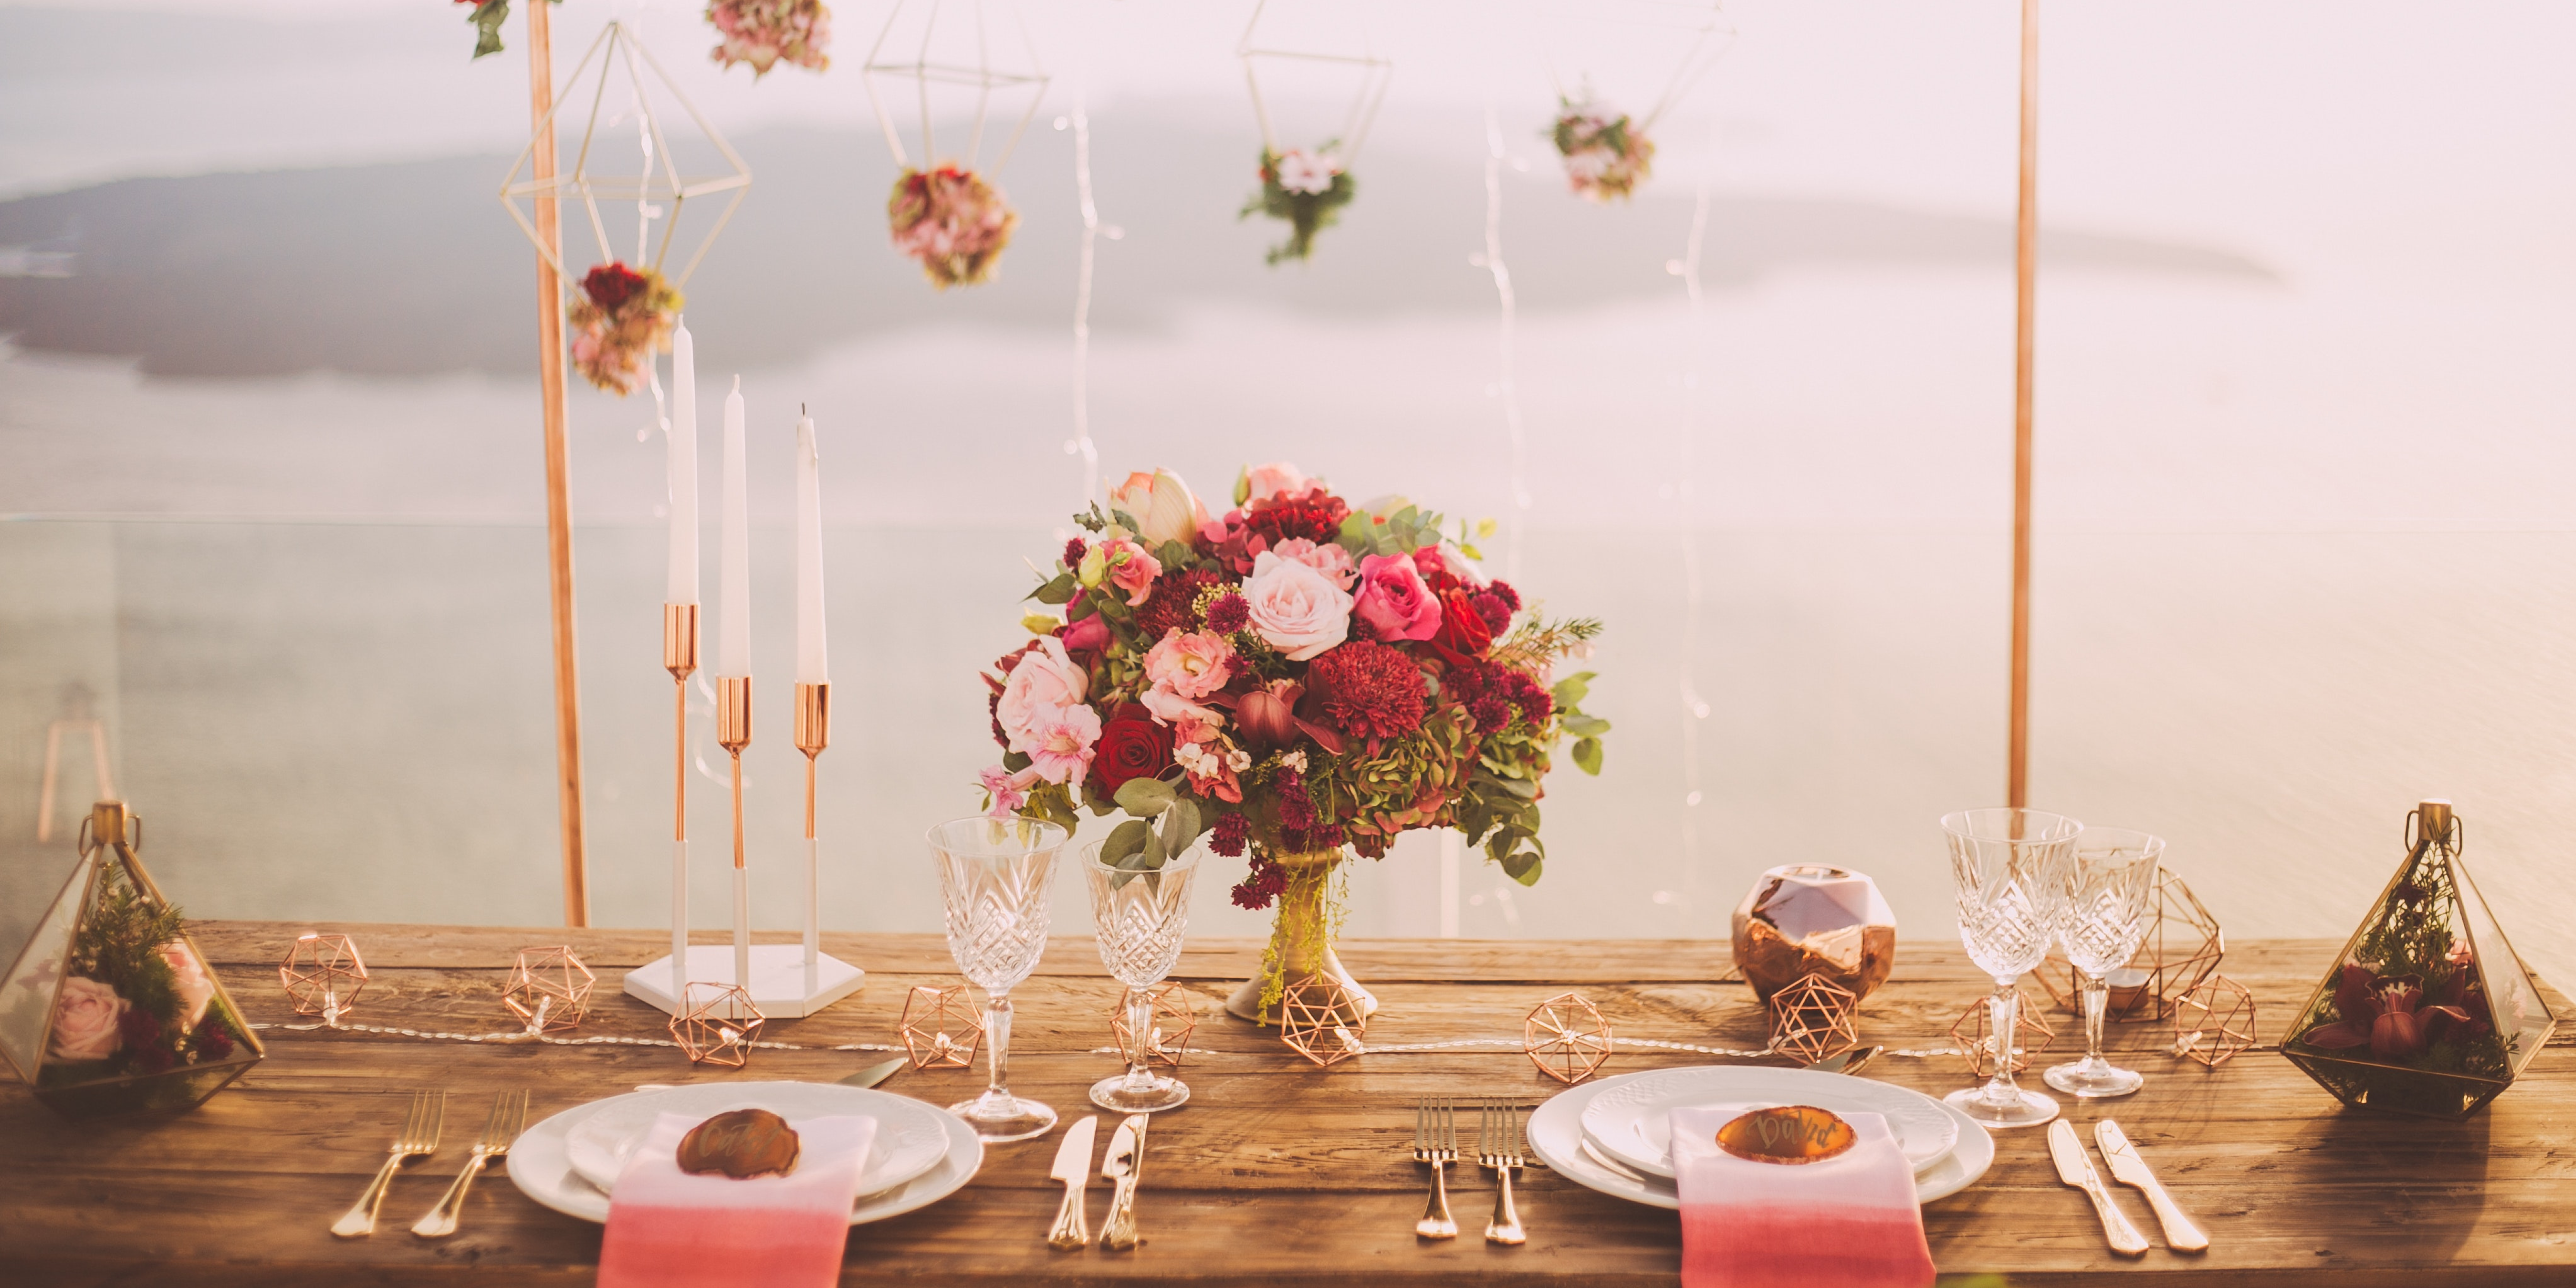 Top 5 Adult Birthday Table Arrangement Inspirations With Flowers